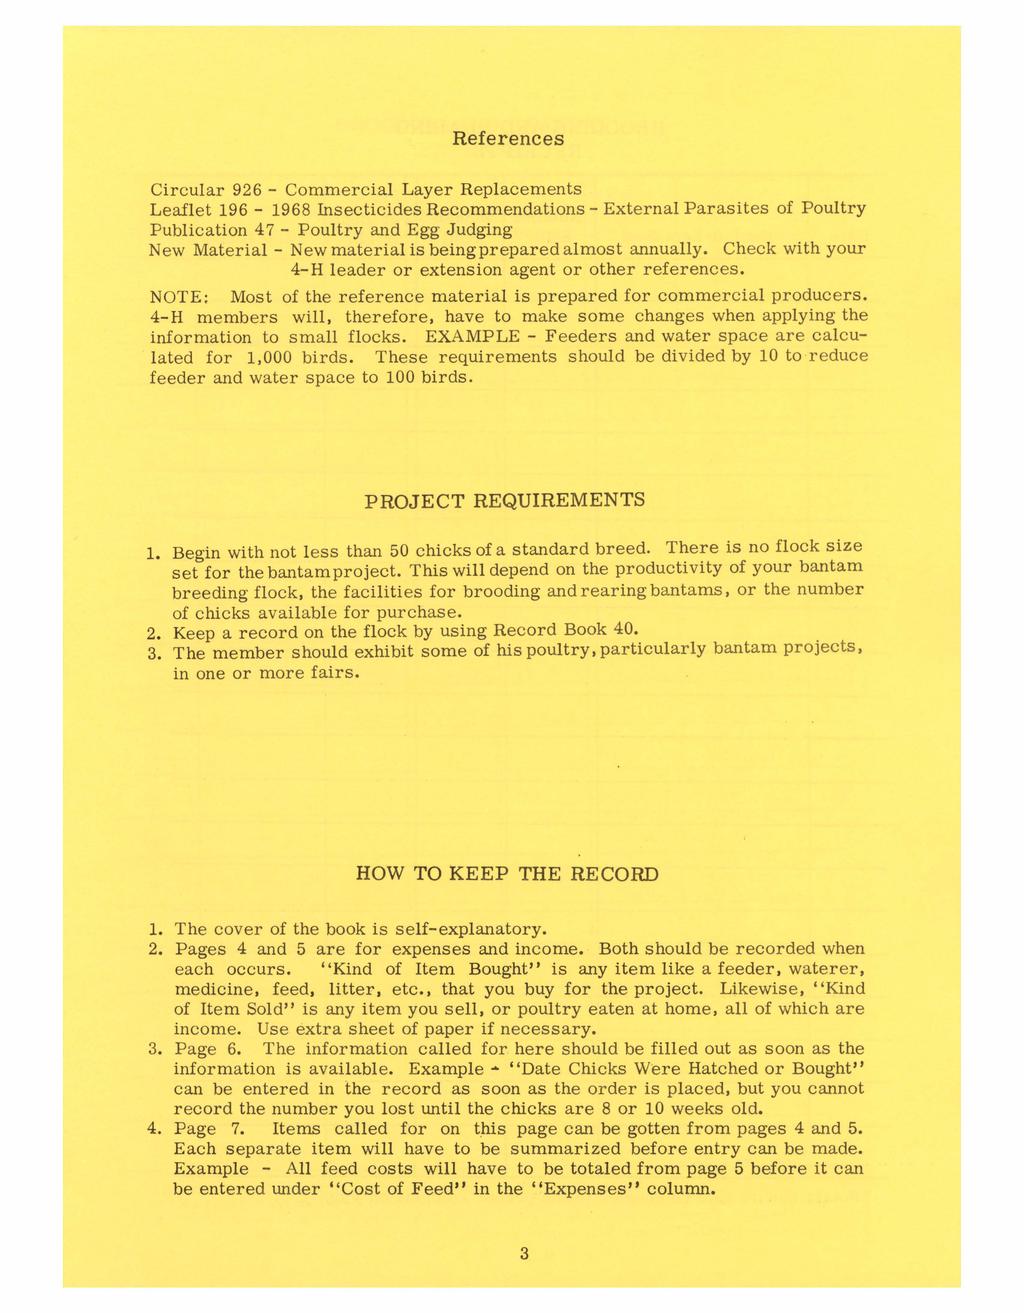 References Circular 926 - Commercial Layer Replacements Leaflet 196-1968 Insecticides Recommendations - External Parasites of Poultry Publication 47 - Poultry and Egg Judging New Material - New